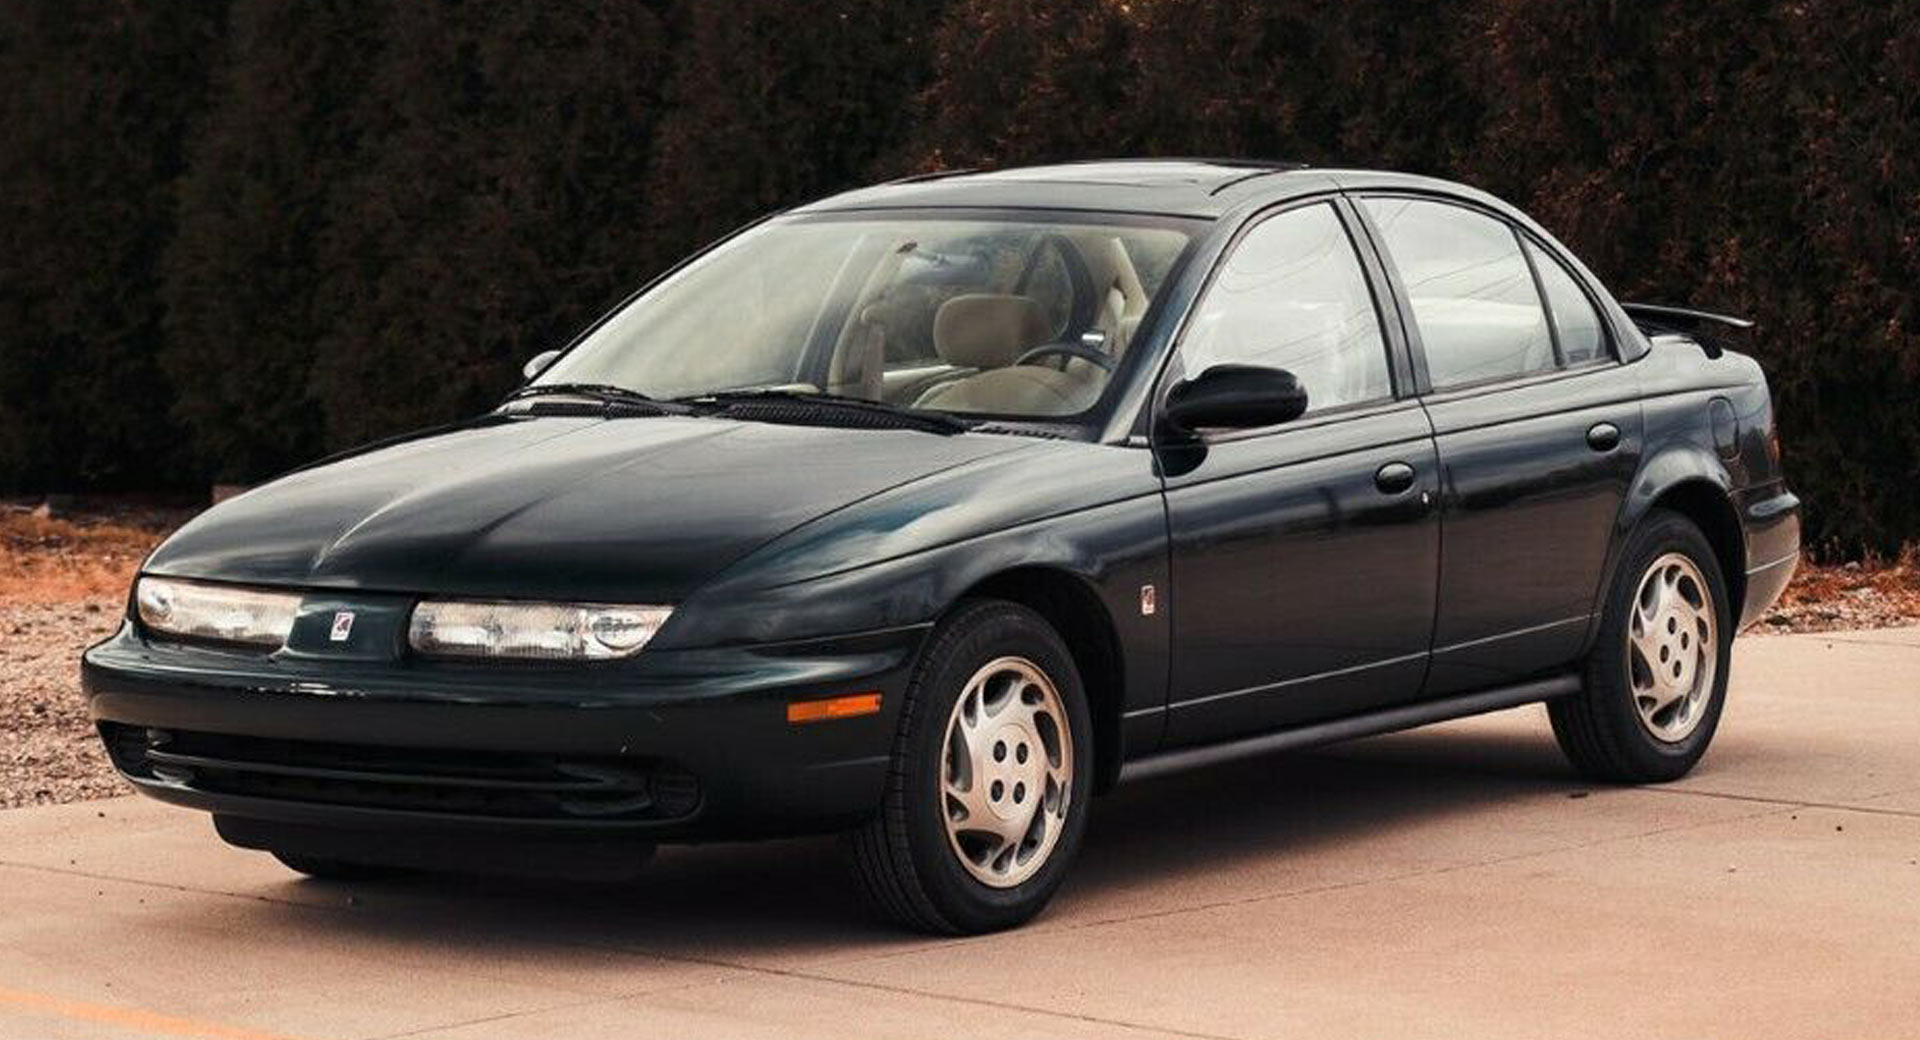 Would You Splurge $10,000 On A 4K-Mile 1996 Saturn SL? | Carscoops